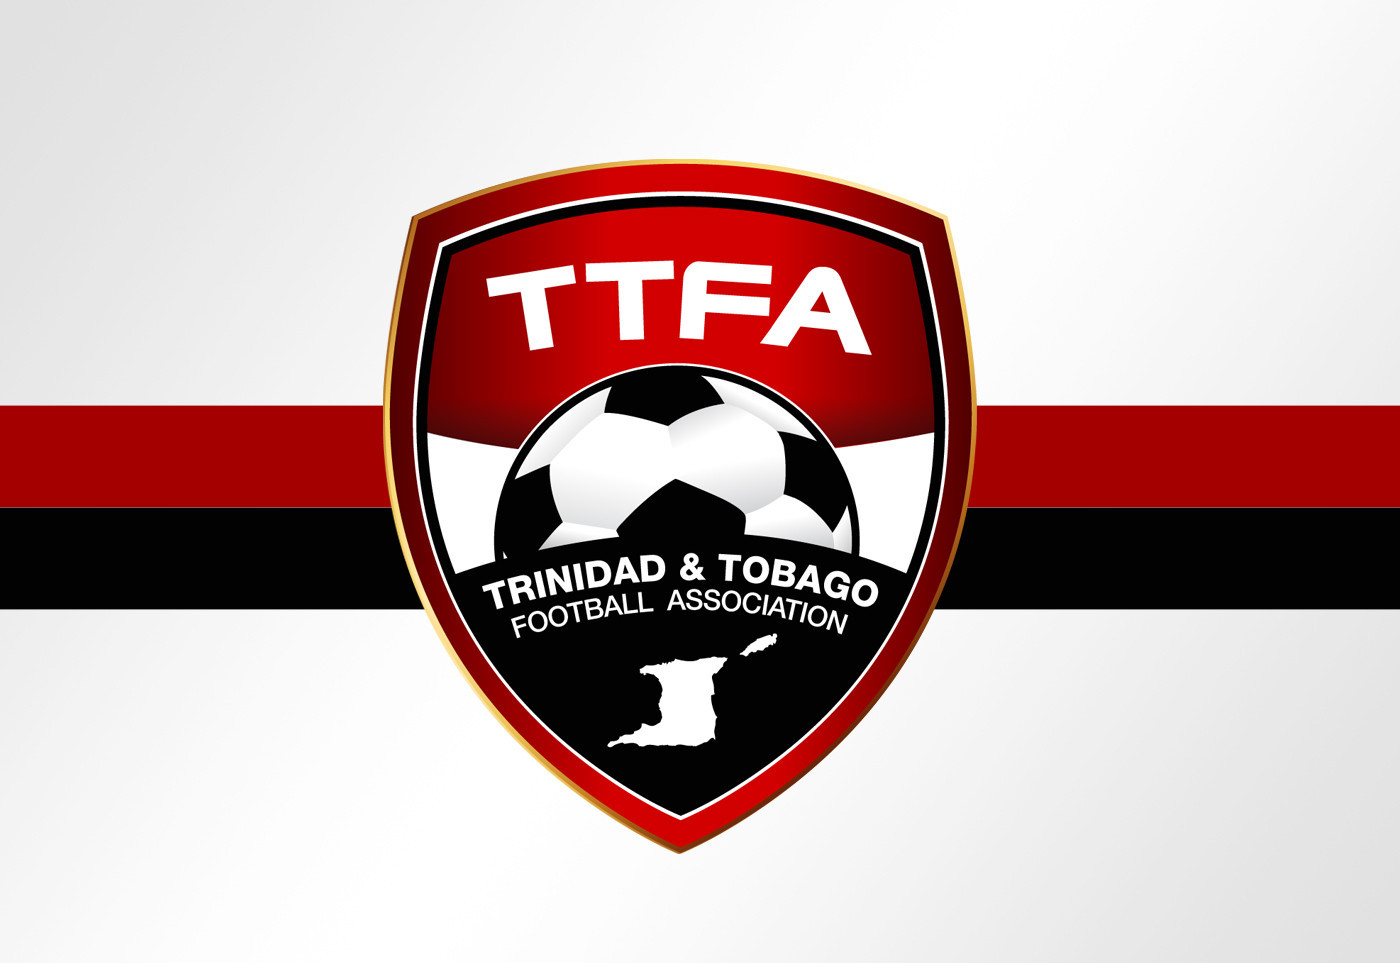 FIFA has suspended the Trinidad and Tobago Football Association for "grave violations" of its statutes ©Getty Images